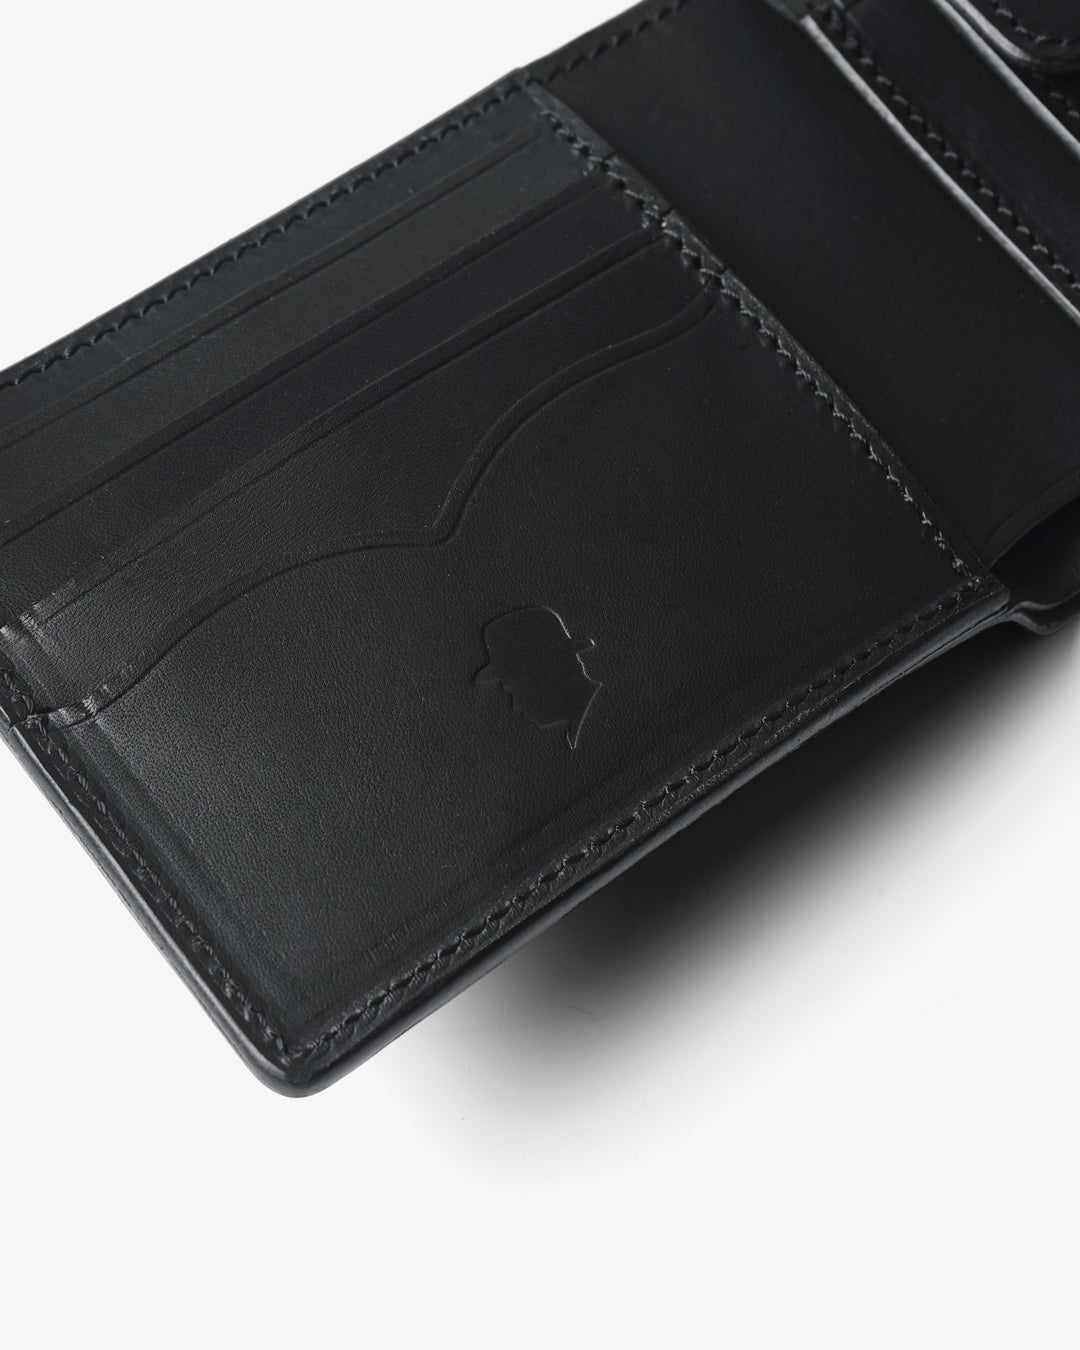 JUST A MAN'S WALLET